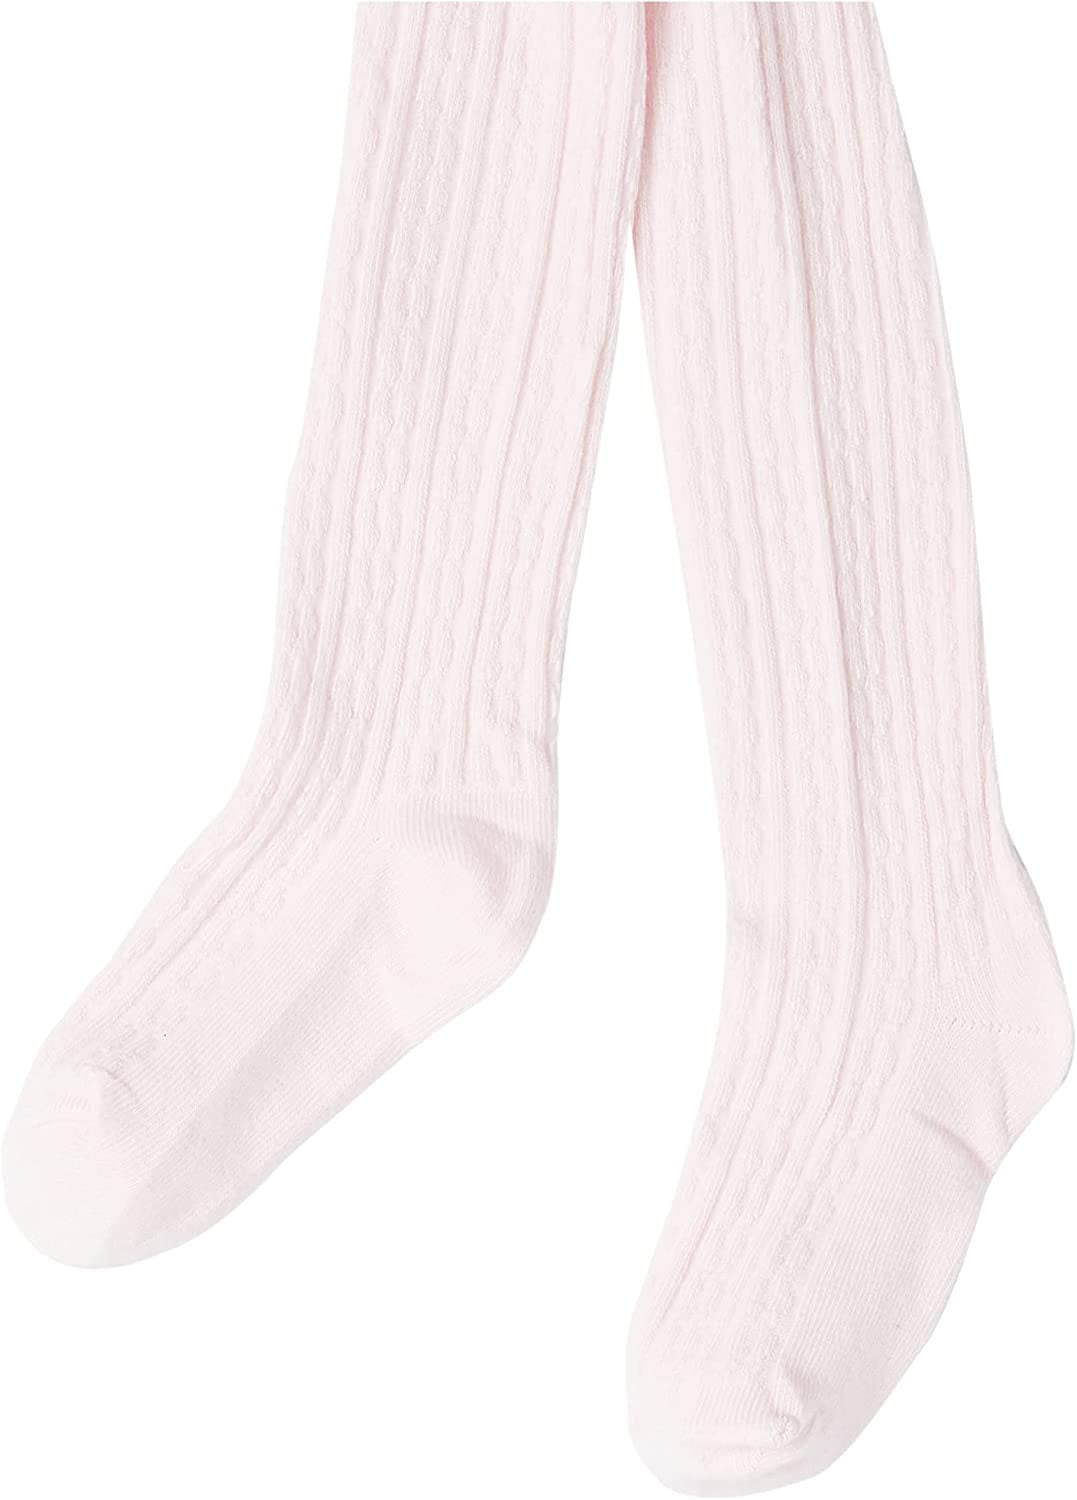 Hudson Baby Infant and Toddler Girl Cotton Rich Tights, Cream Pink Cableknit